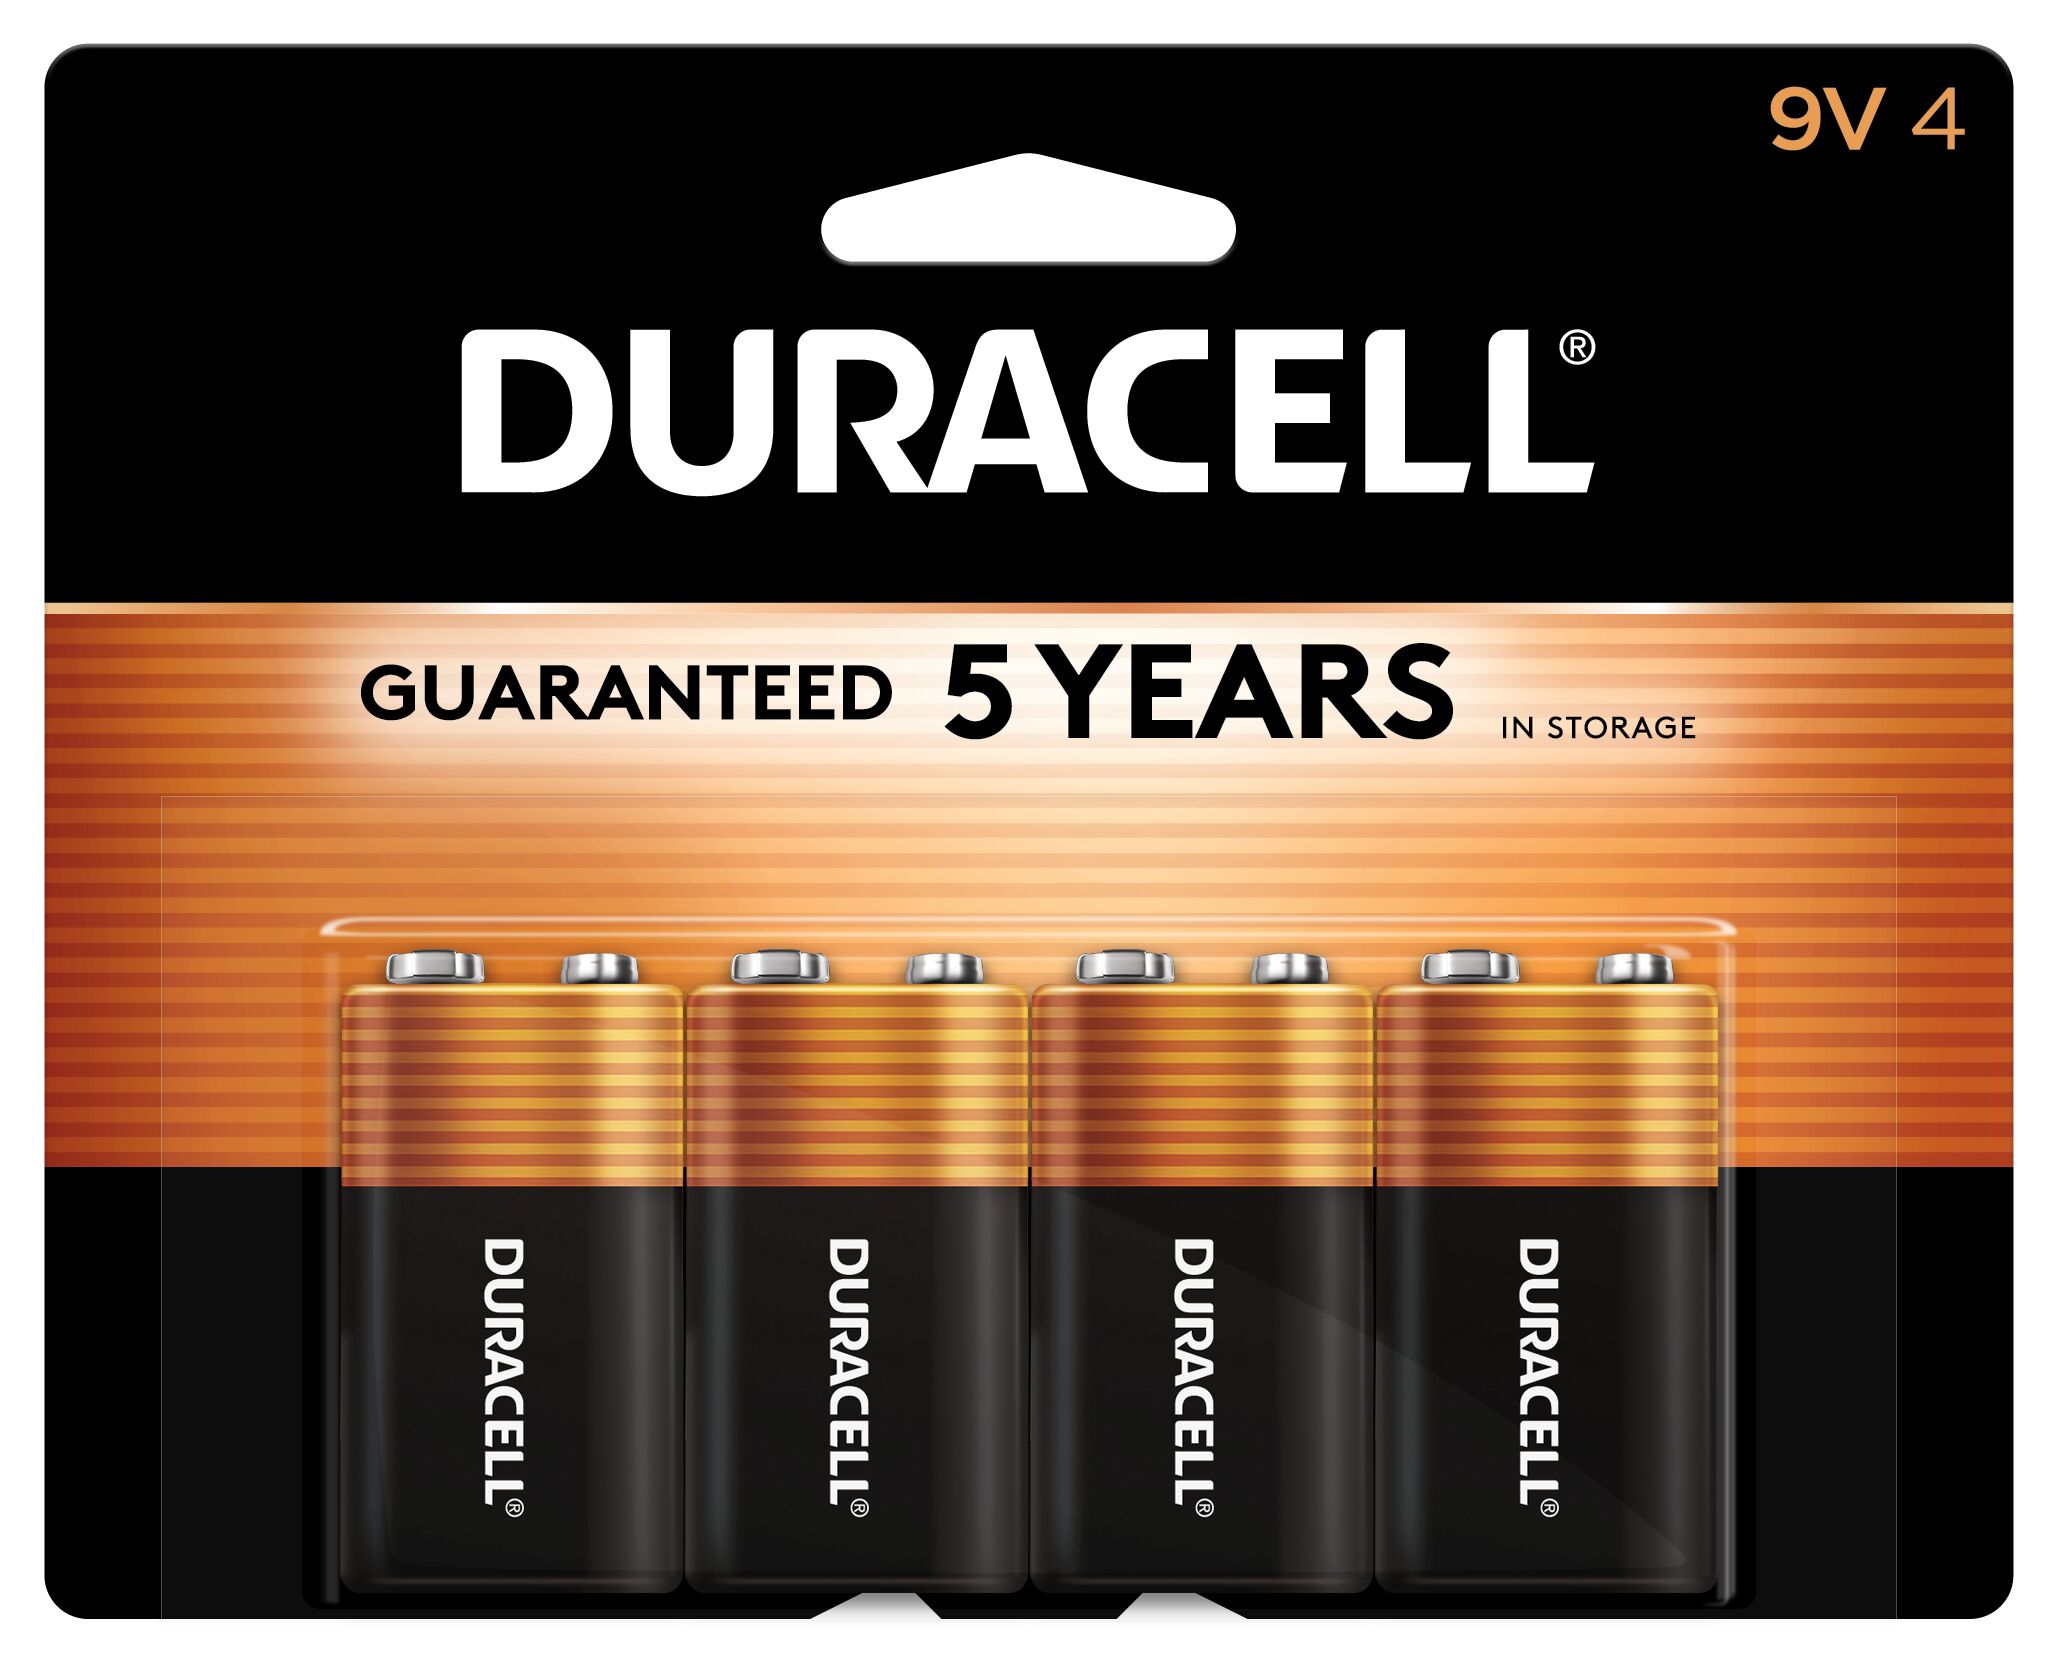 Better Than Duracell? Pale Blue Earth Makes Its Case: AA, AAA